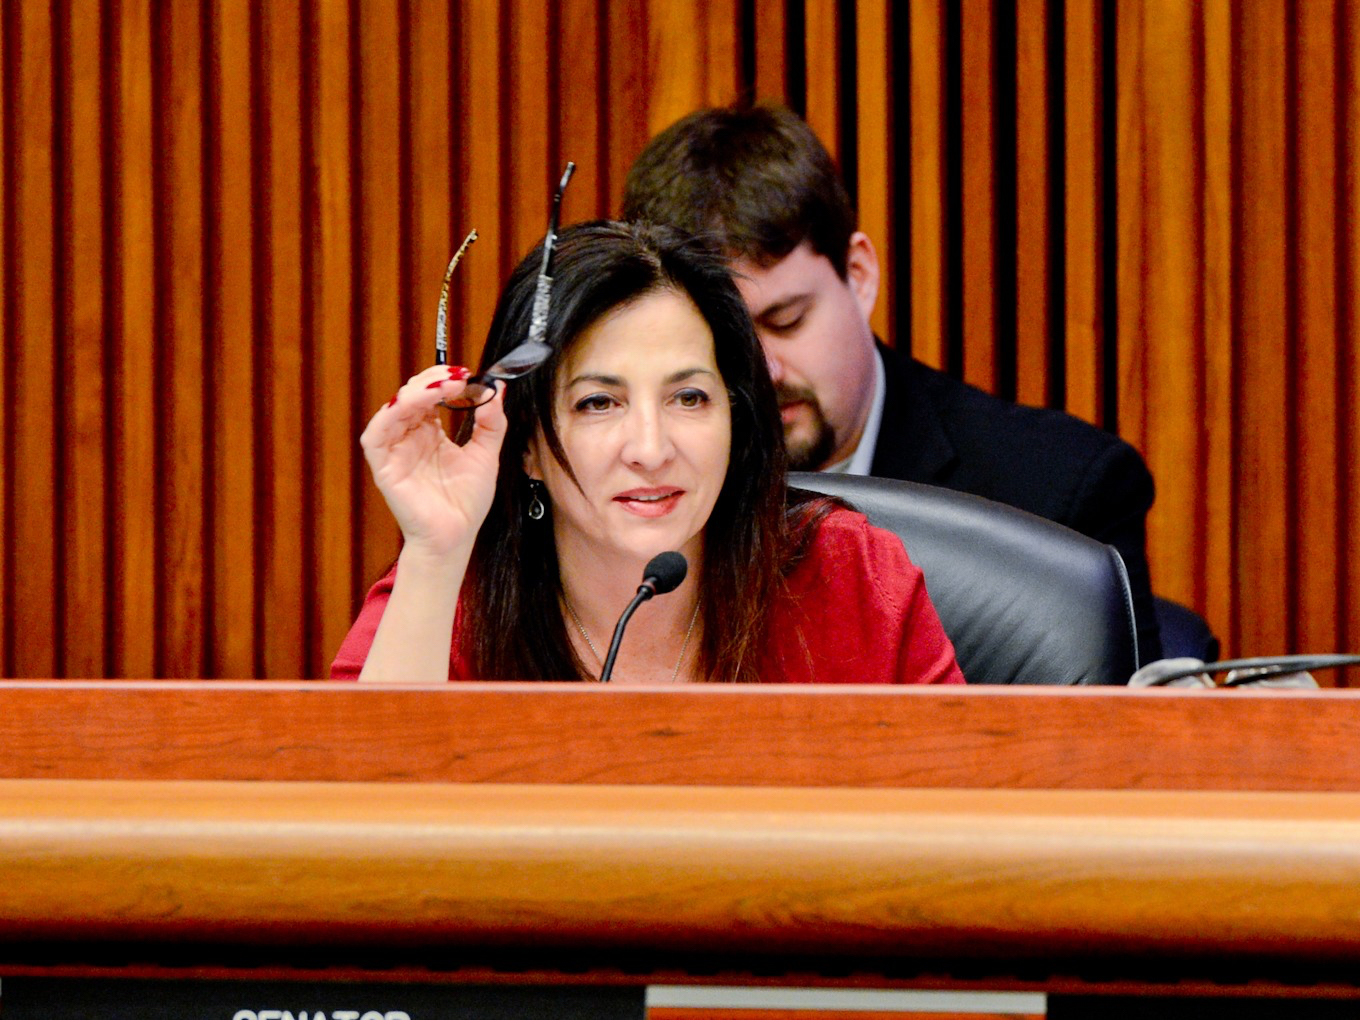 State Sen. Diane Savino, a former member of the Independent Democratic Conference, avoided being shut out of committee assignments. She has been tapped to chair the Subcommittee on Internet and Technology. Photo courtesy of Savino’s office